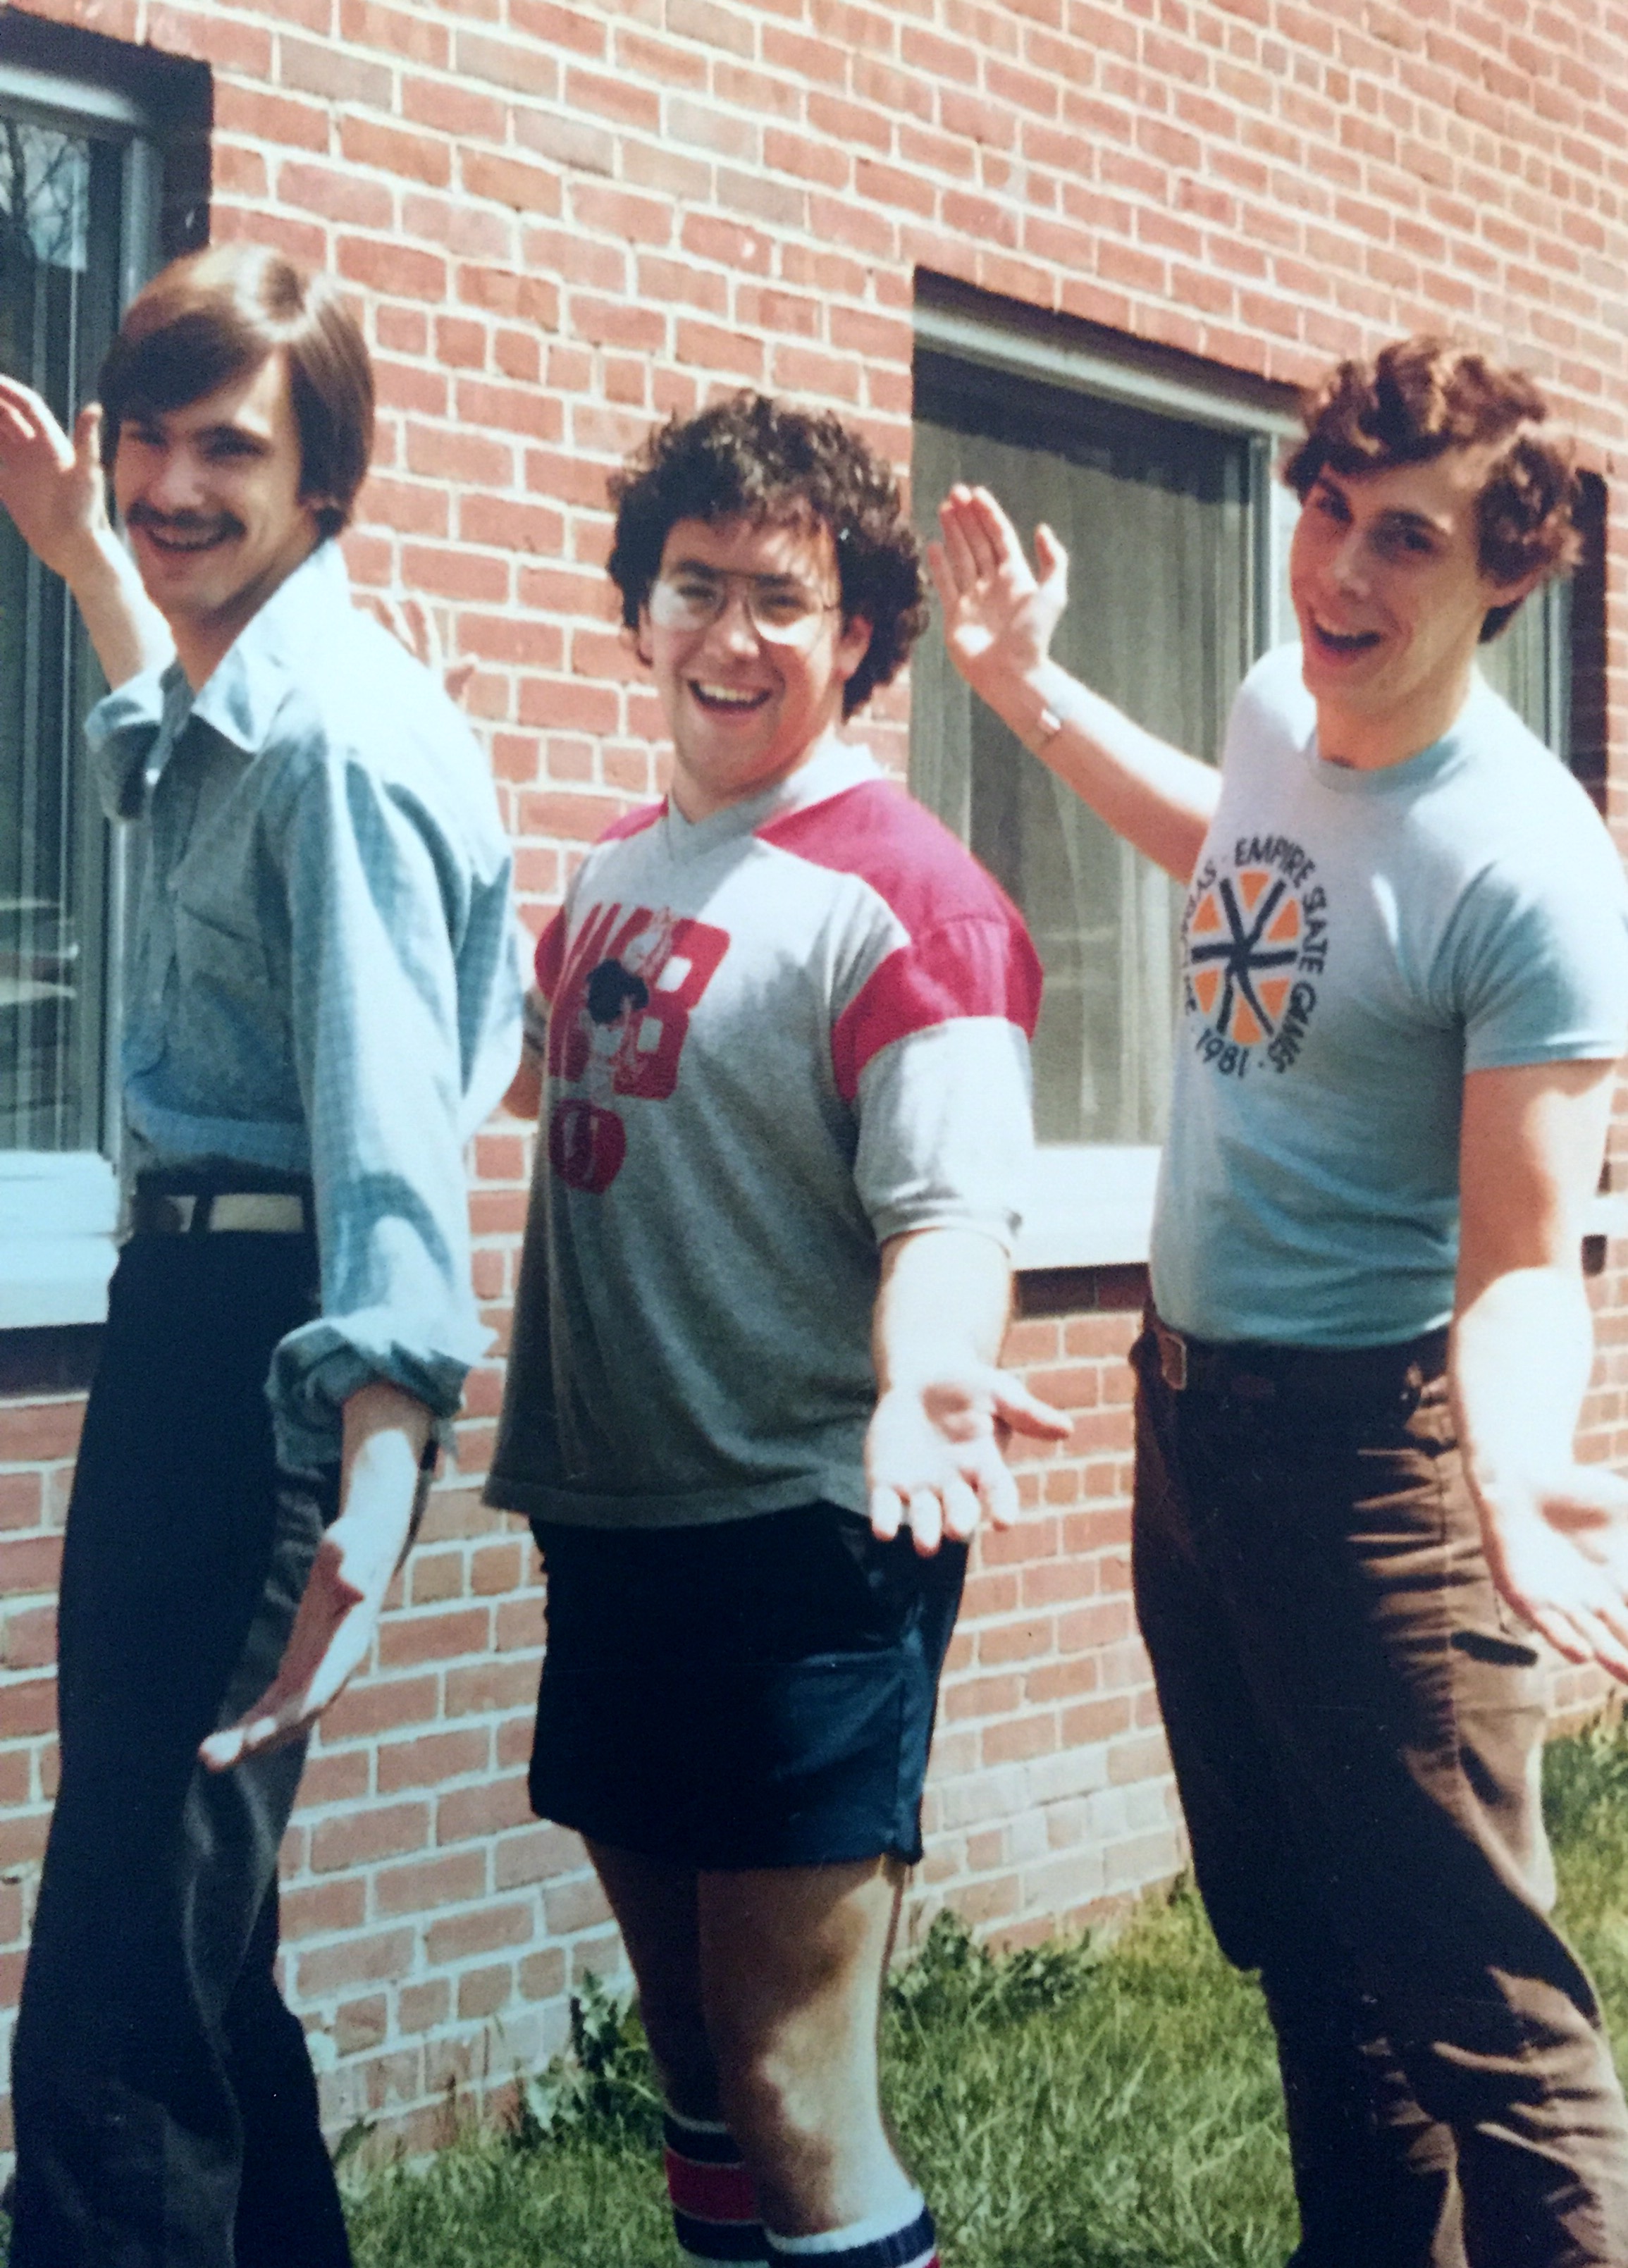 A doo-wop group hanging out, probably outside Watson in 1983